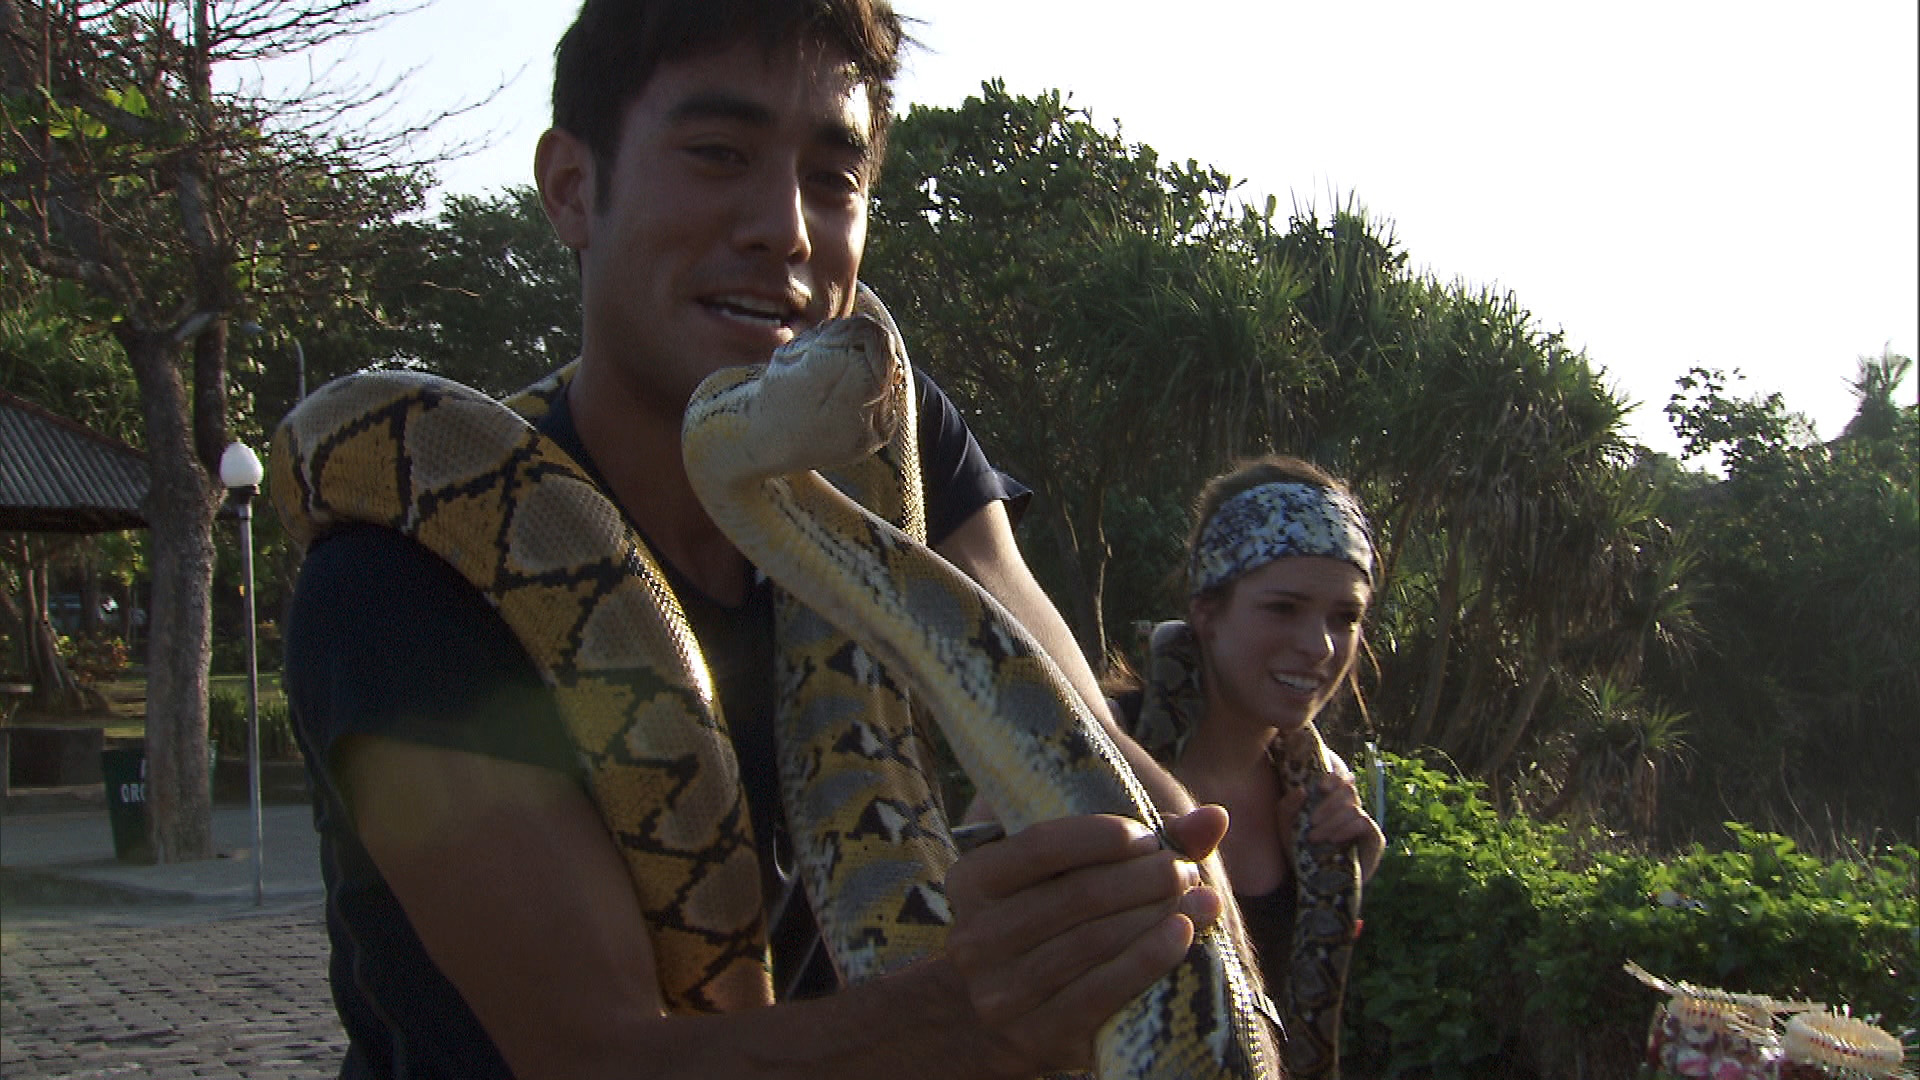 Zach and Rachel must conquer a mutual fear of snakes before getting the next clue.